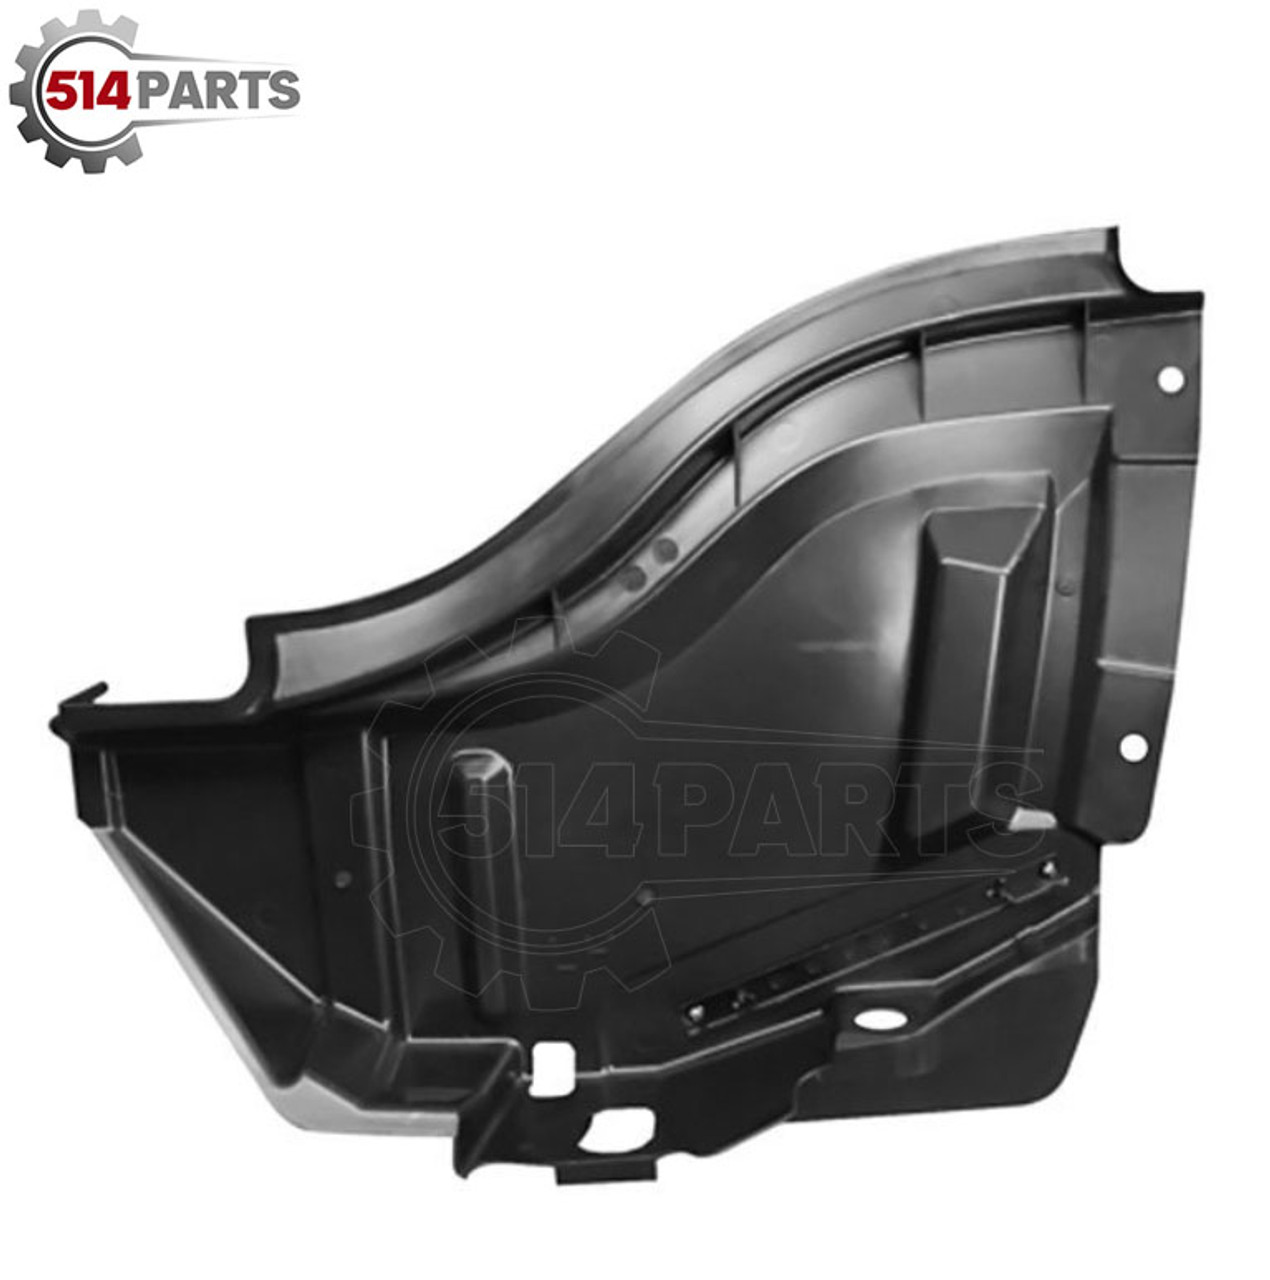 2014 - 2019 TOYOTA TUNDRA FENDER LINER FRONT SECTION - FAUSSE AILE SECTION AVANT